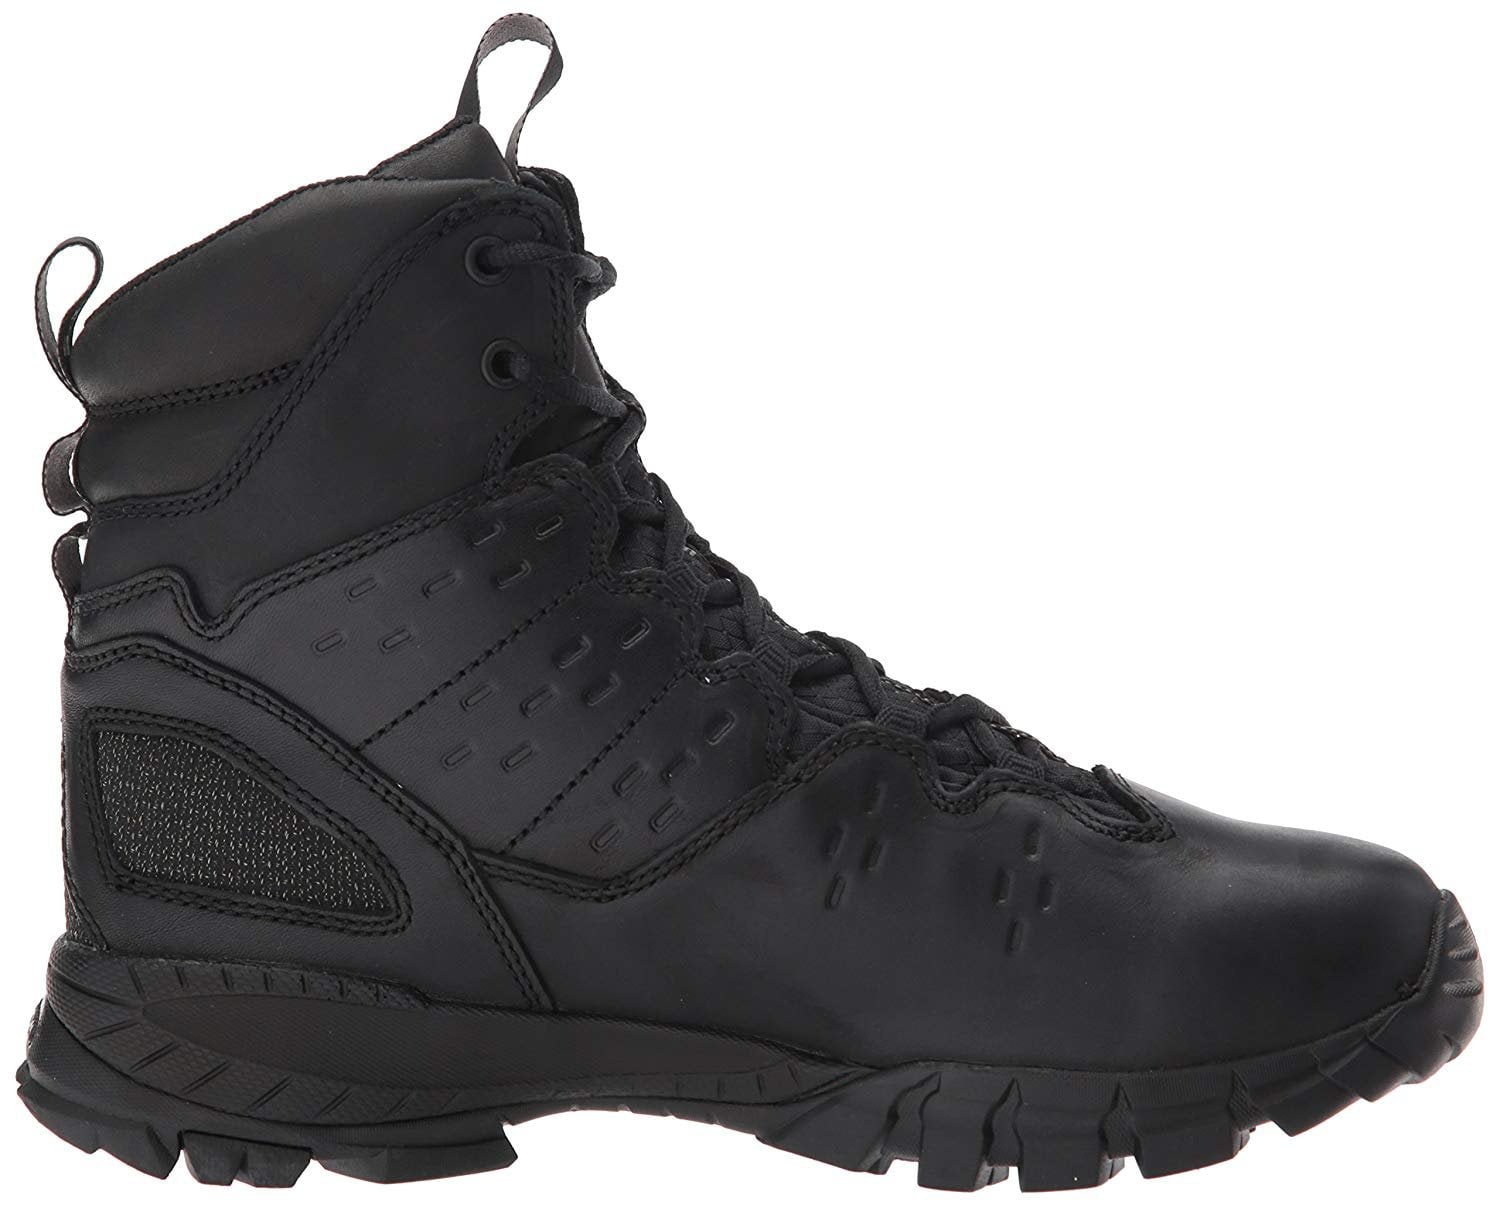 Black All Sizes 5.11 Tactical Xprt 8 Inch Unisex Boots Military 